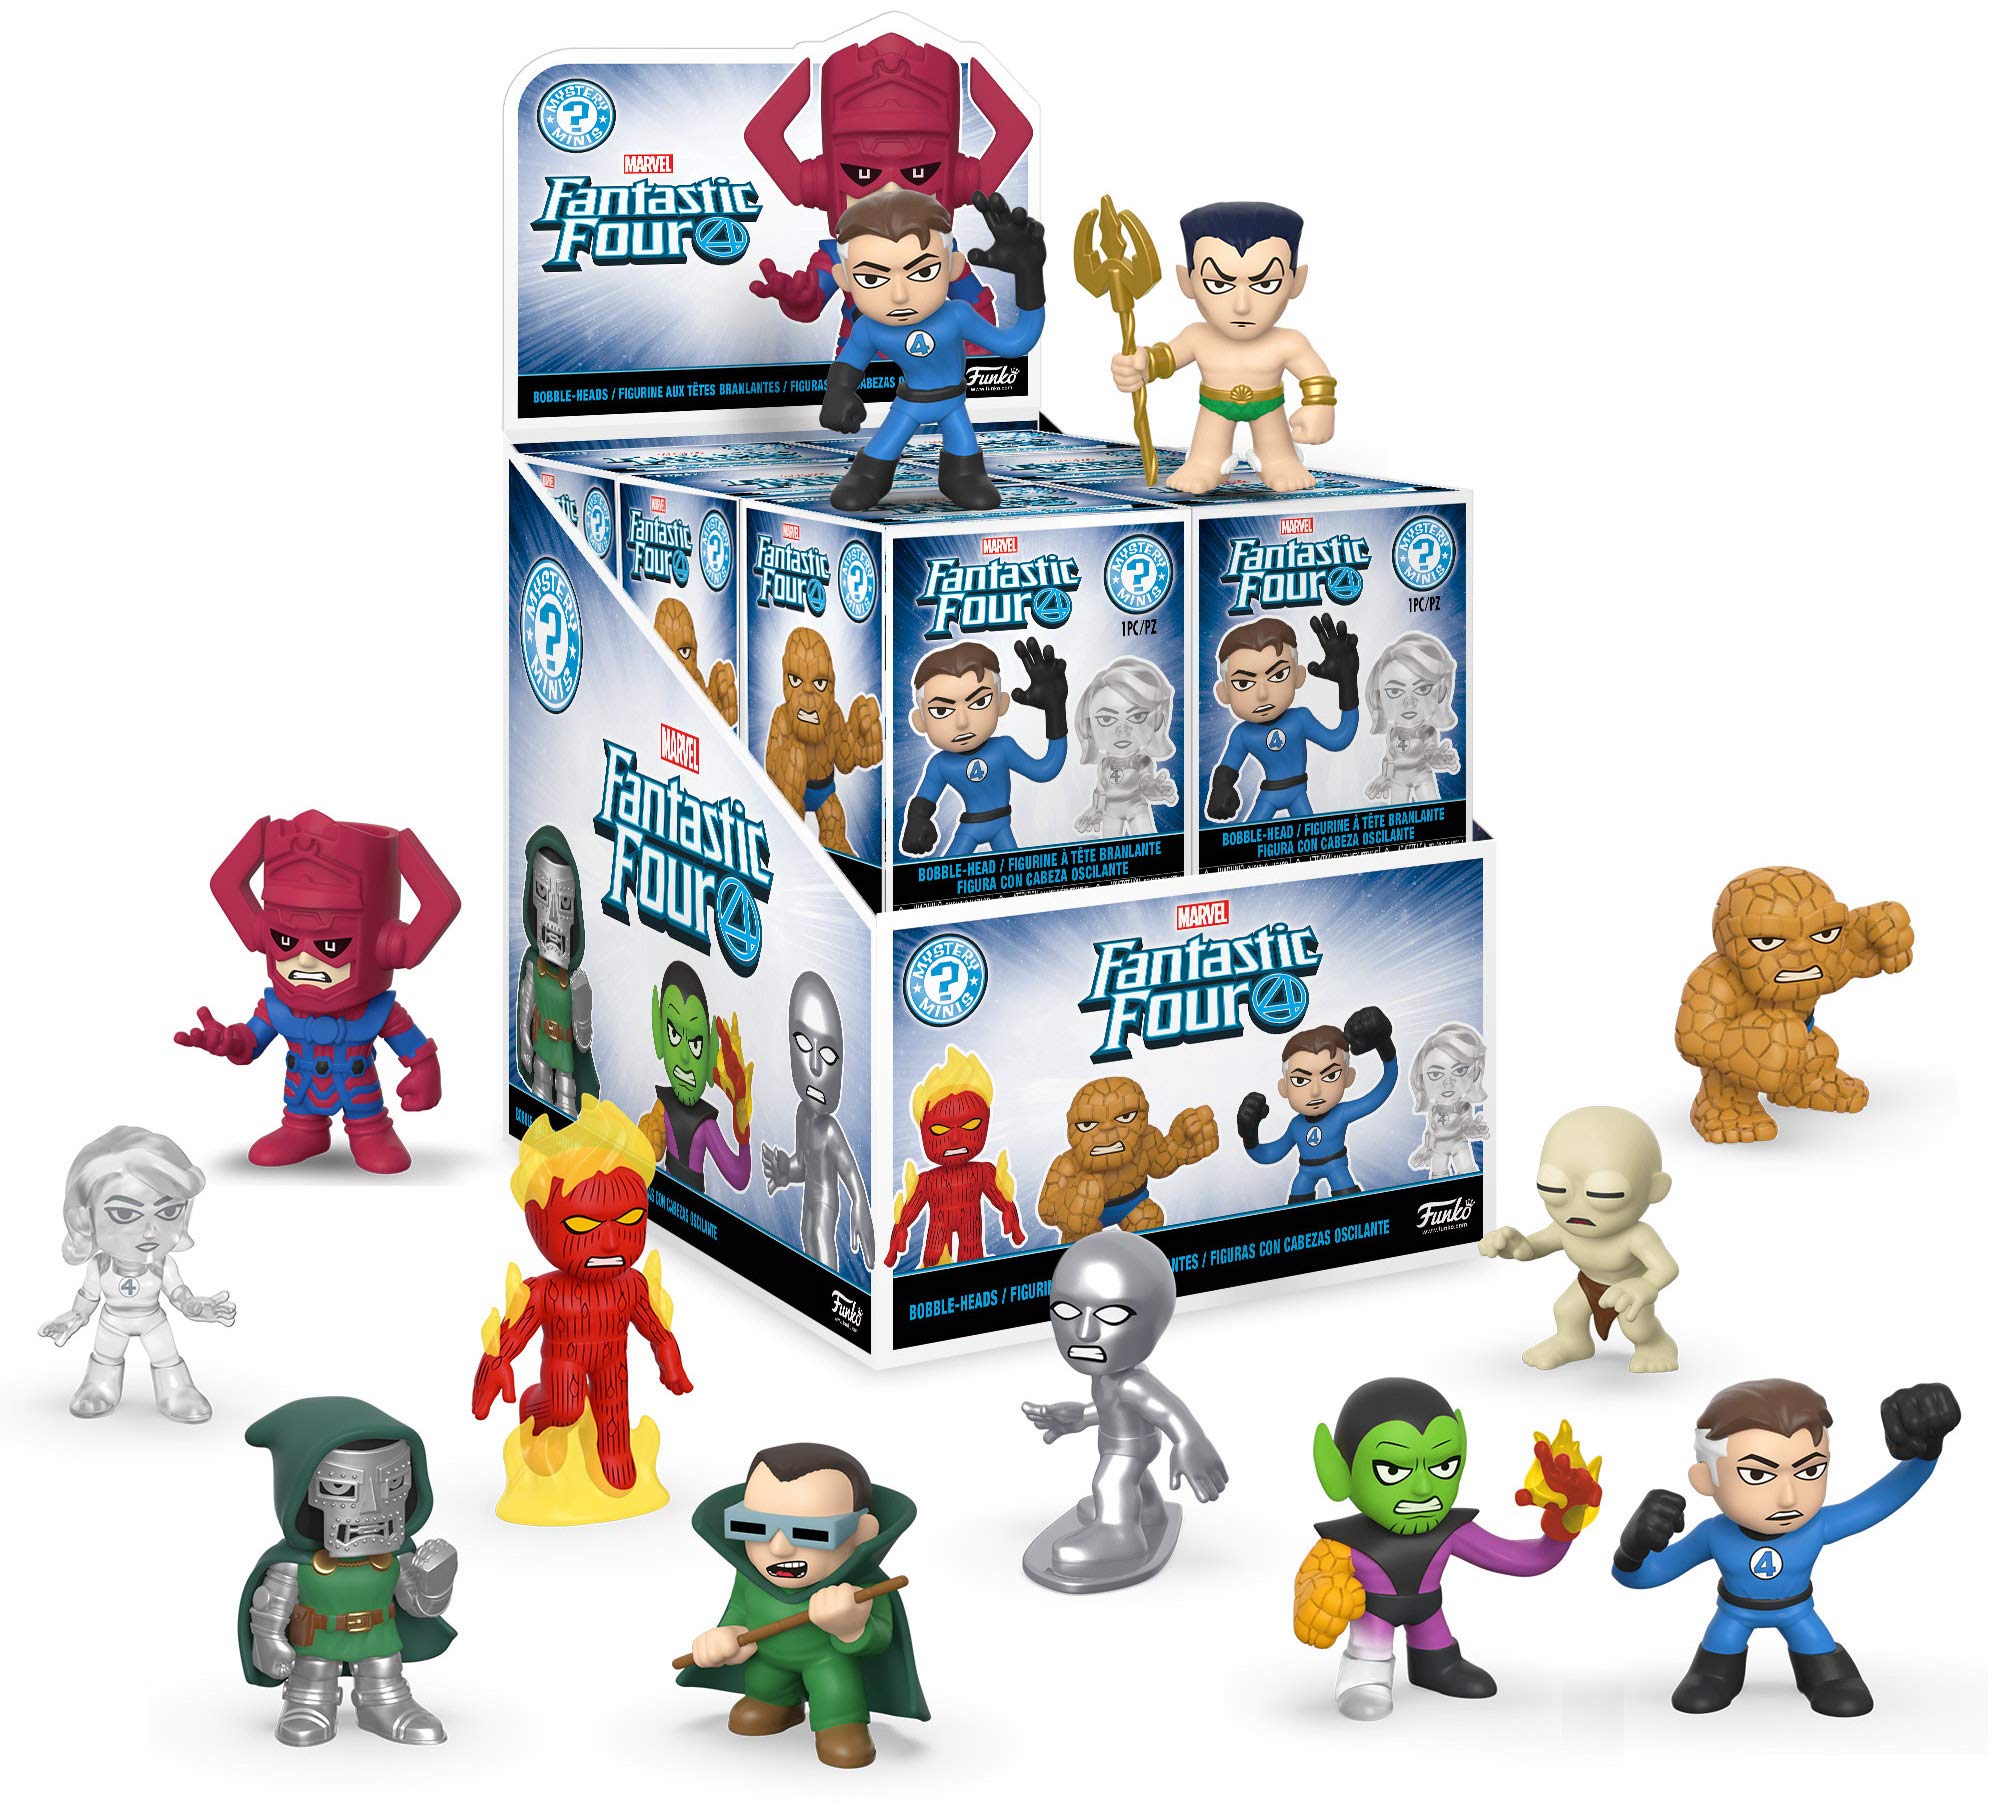 Funko - Fantastic Four - Mystery Mini Store Display with 12 Sealed Boxed Figures